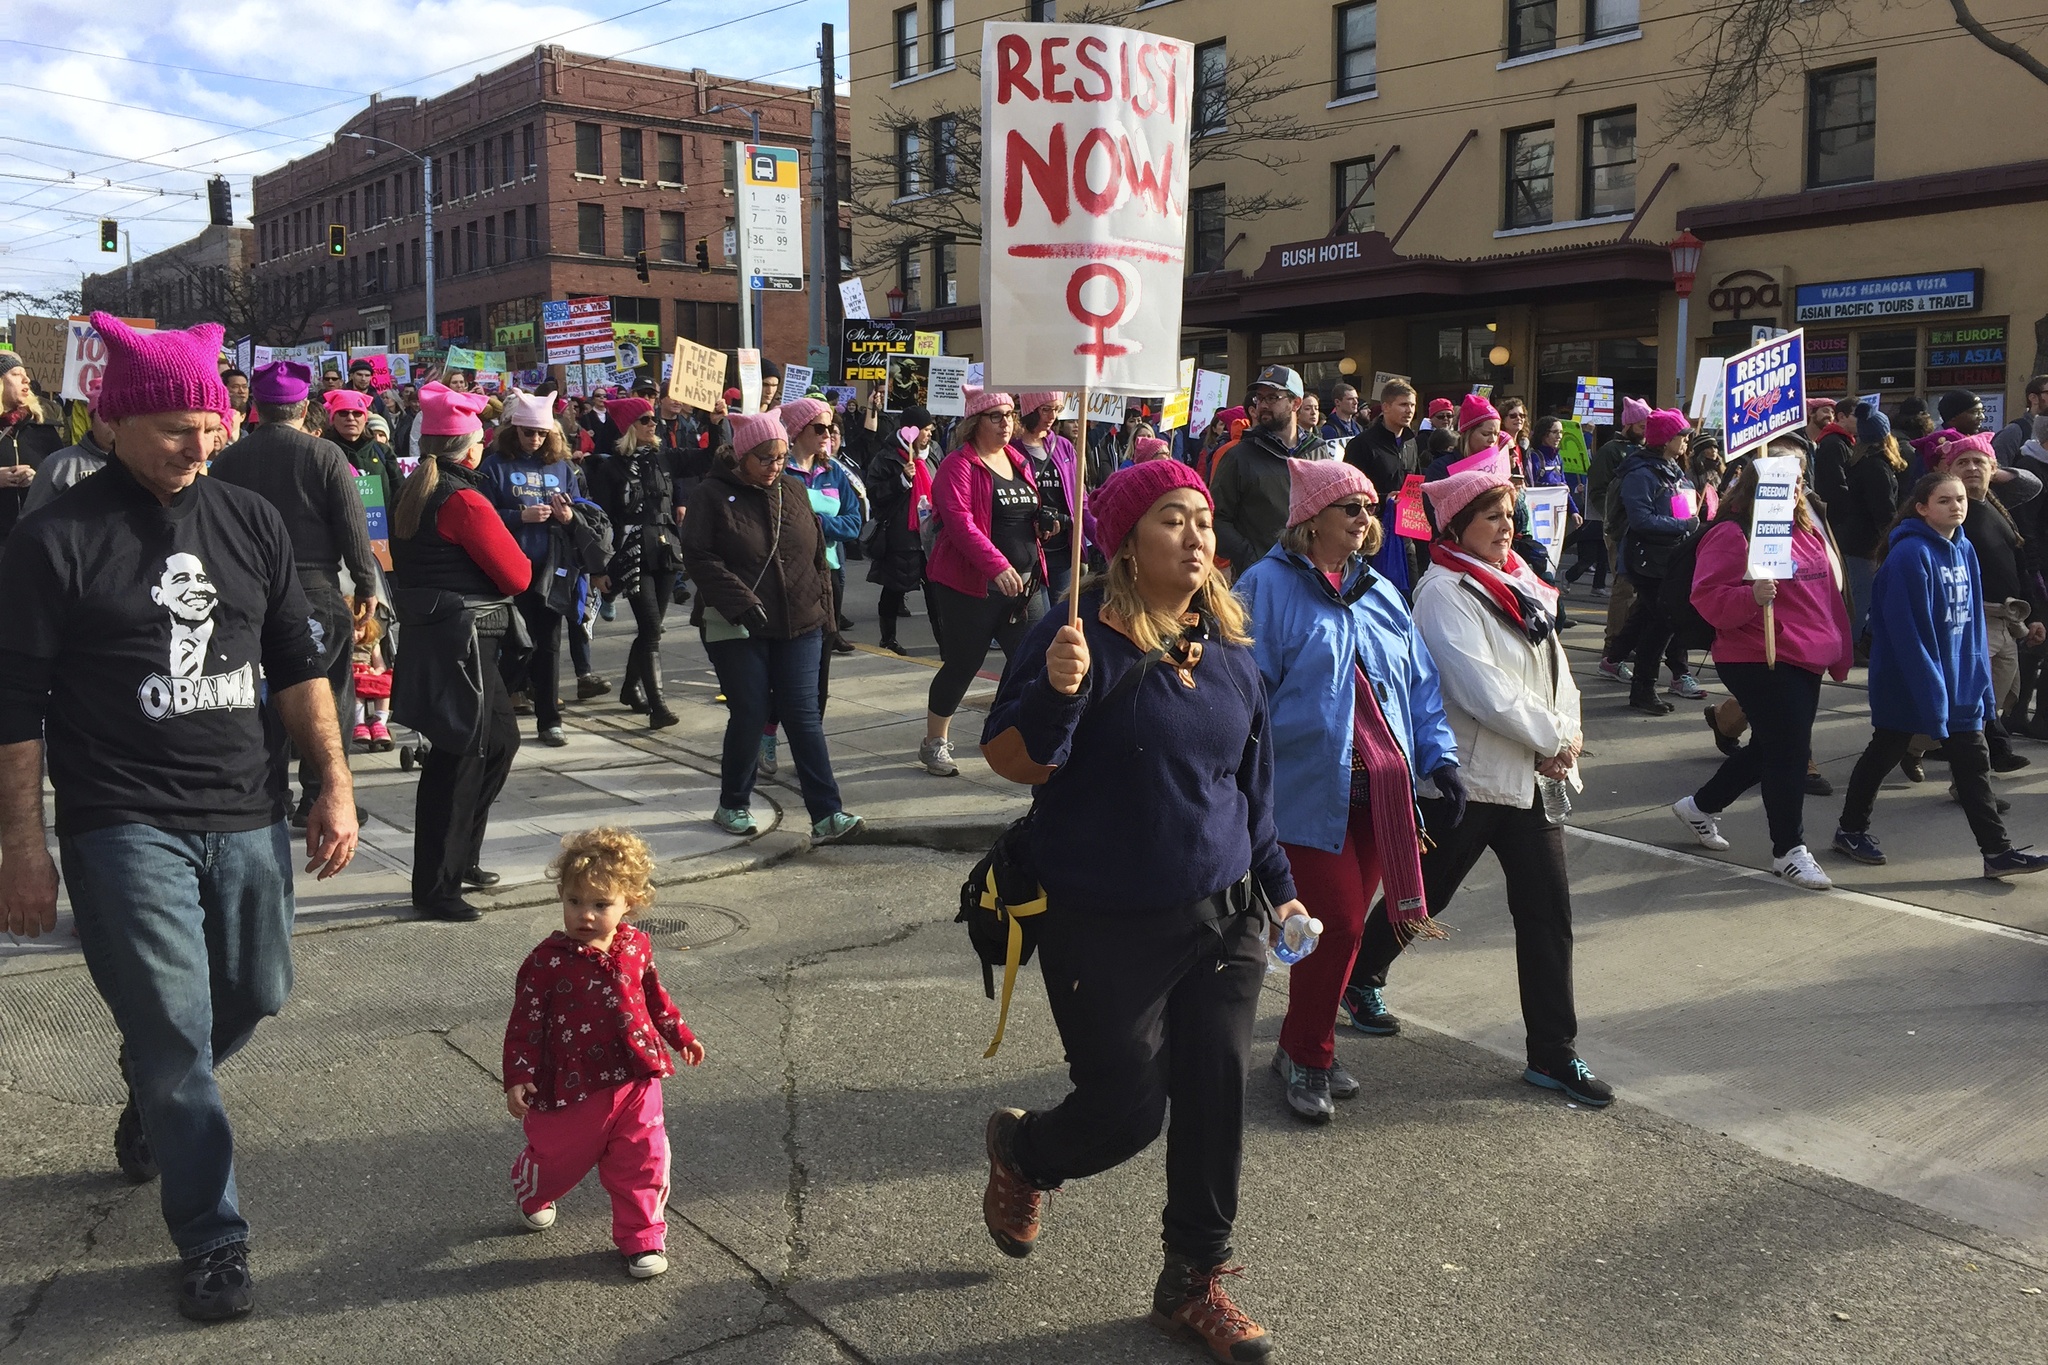 My Mother, My Sister, and I Attended Three Different Women’s Marches in Three Different Parts of the World